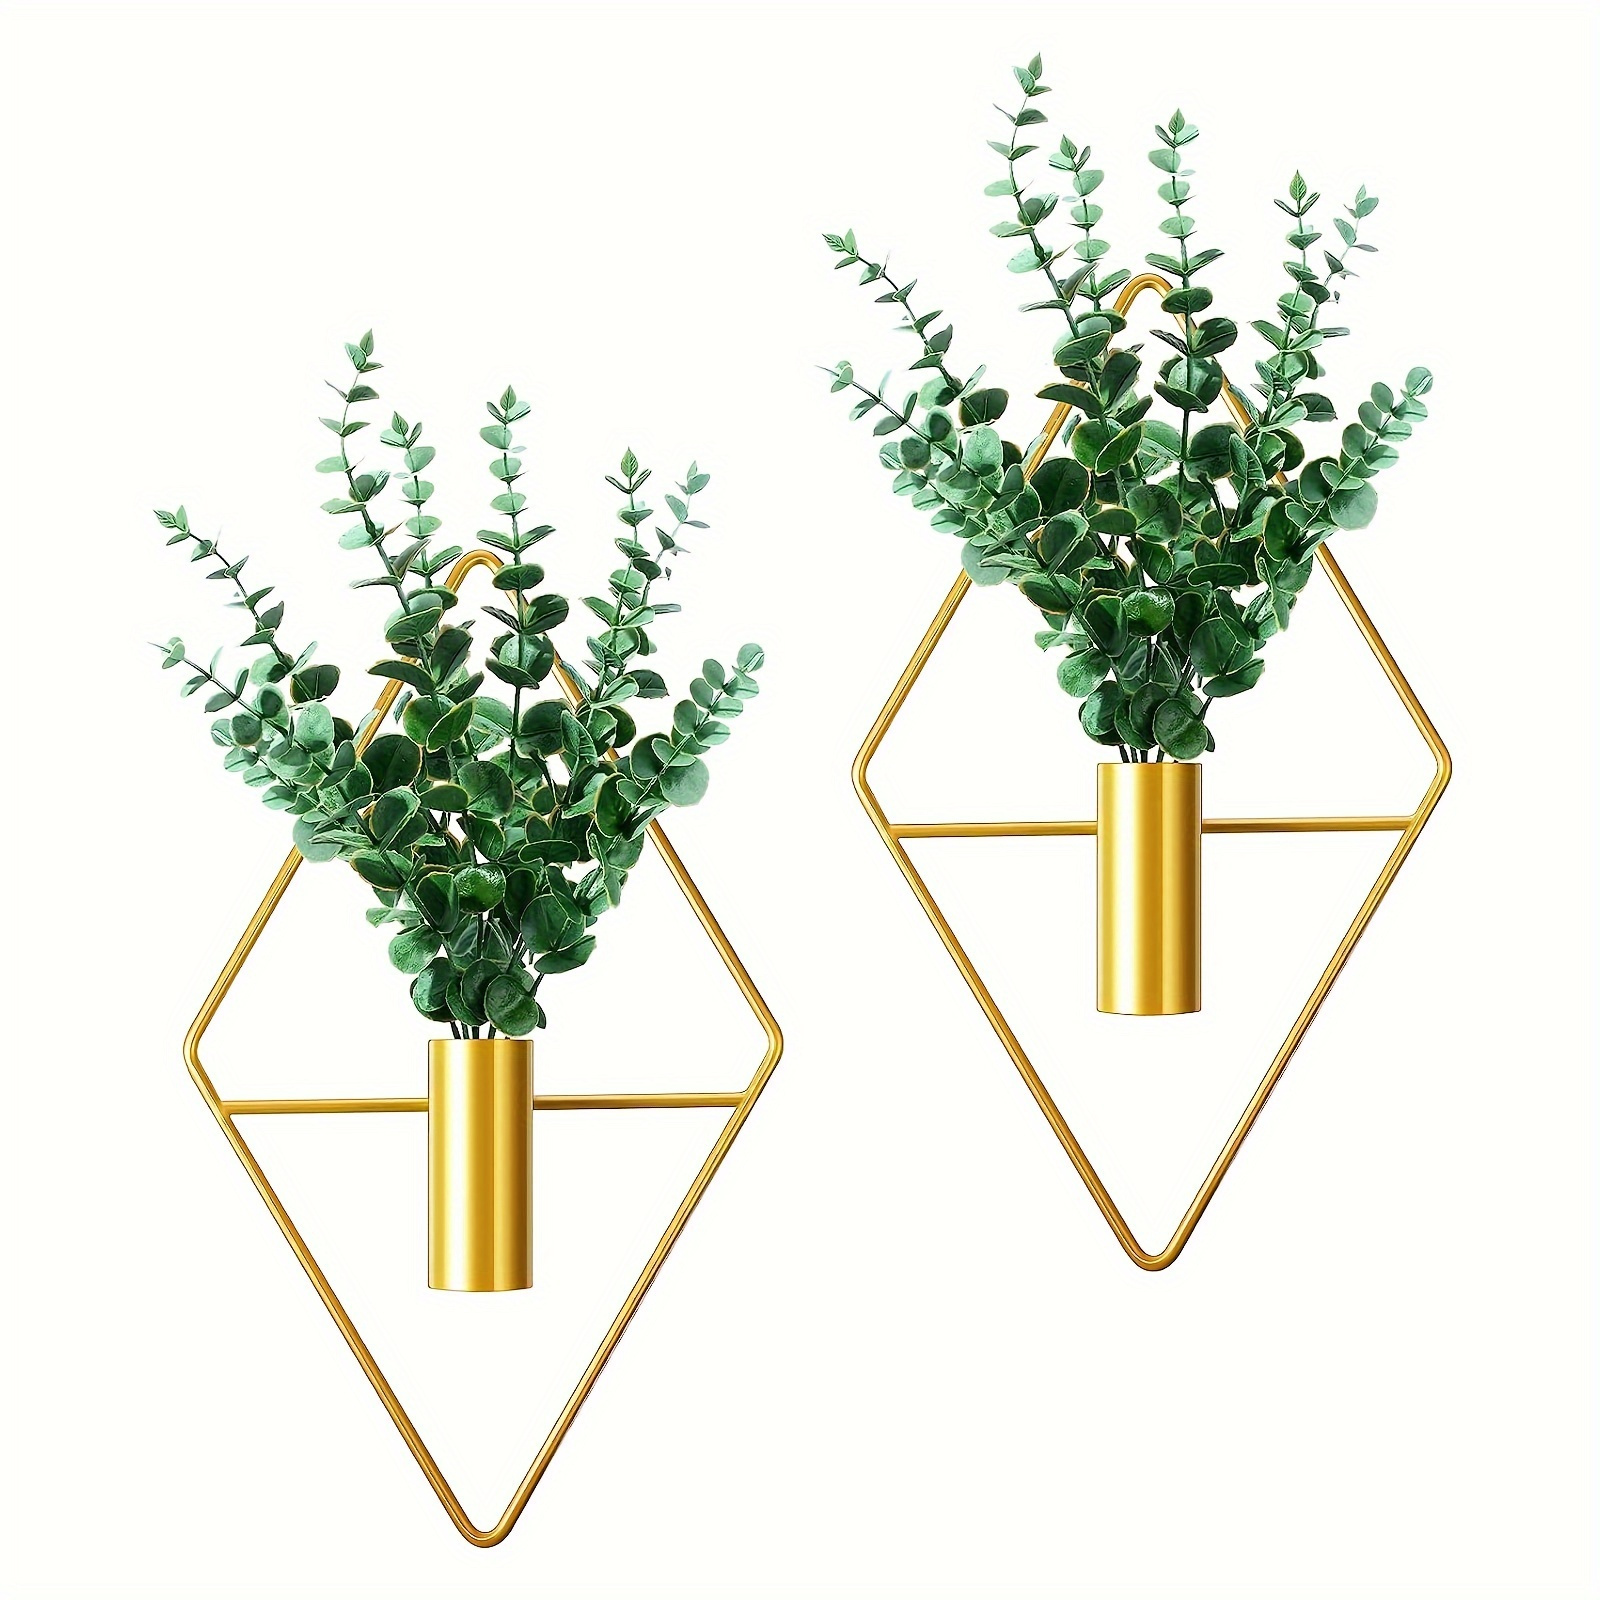 

artistic Metal" 2-piece Gold Diamond-shaped Metal Wall Hanging Planters - Modern Geometric Indoor/outdoor Decor For Home, Living Room, Office